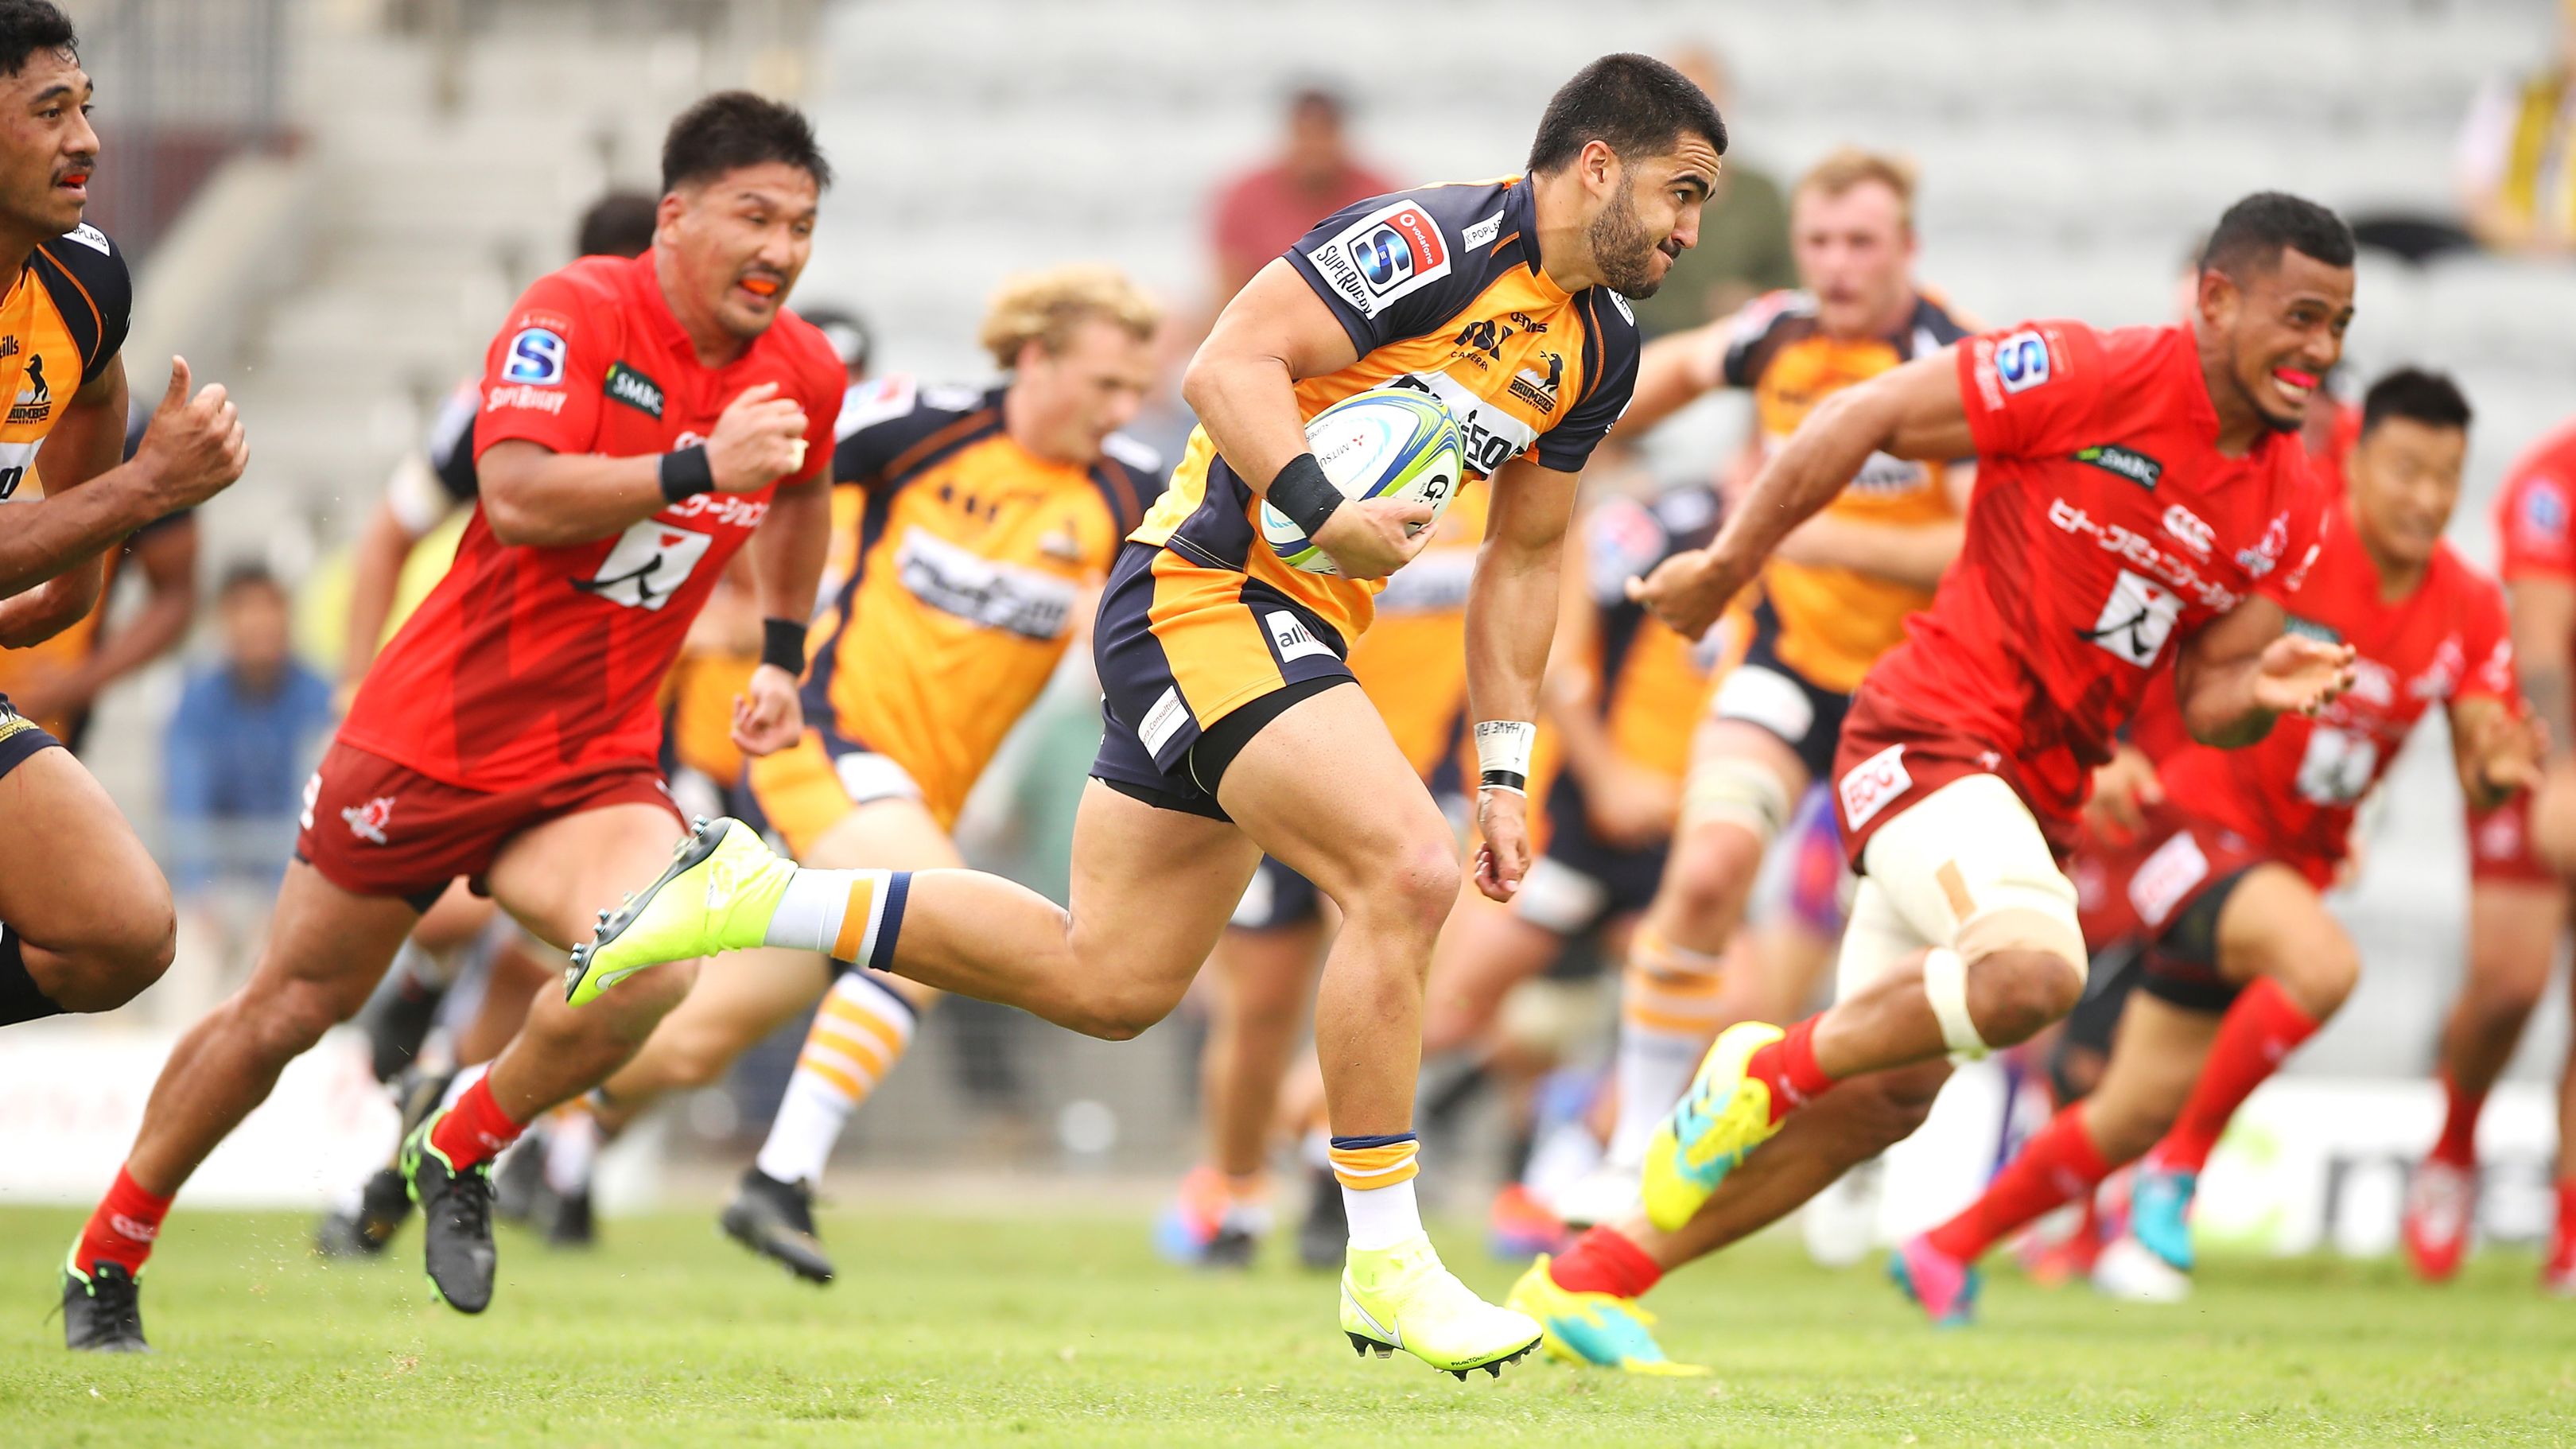 Tom Wright of the Brumbies makes a break during the round six Super Rugby match between the Sunwolves and the Brumbies in 2020.